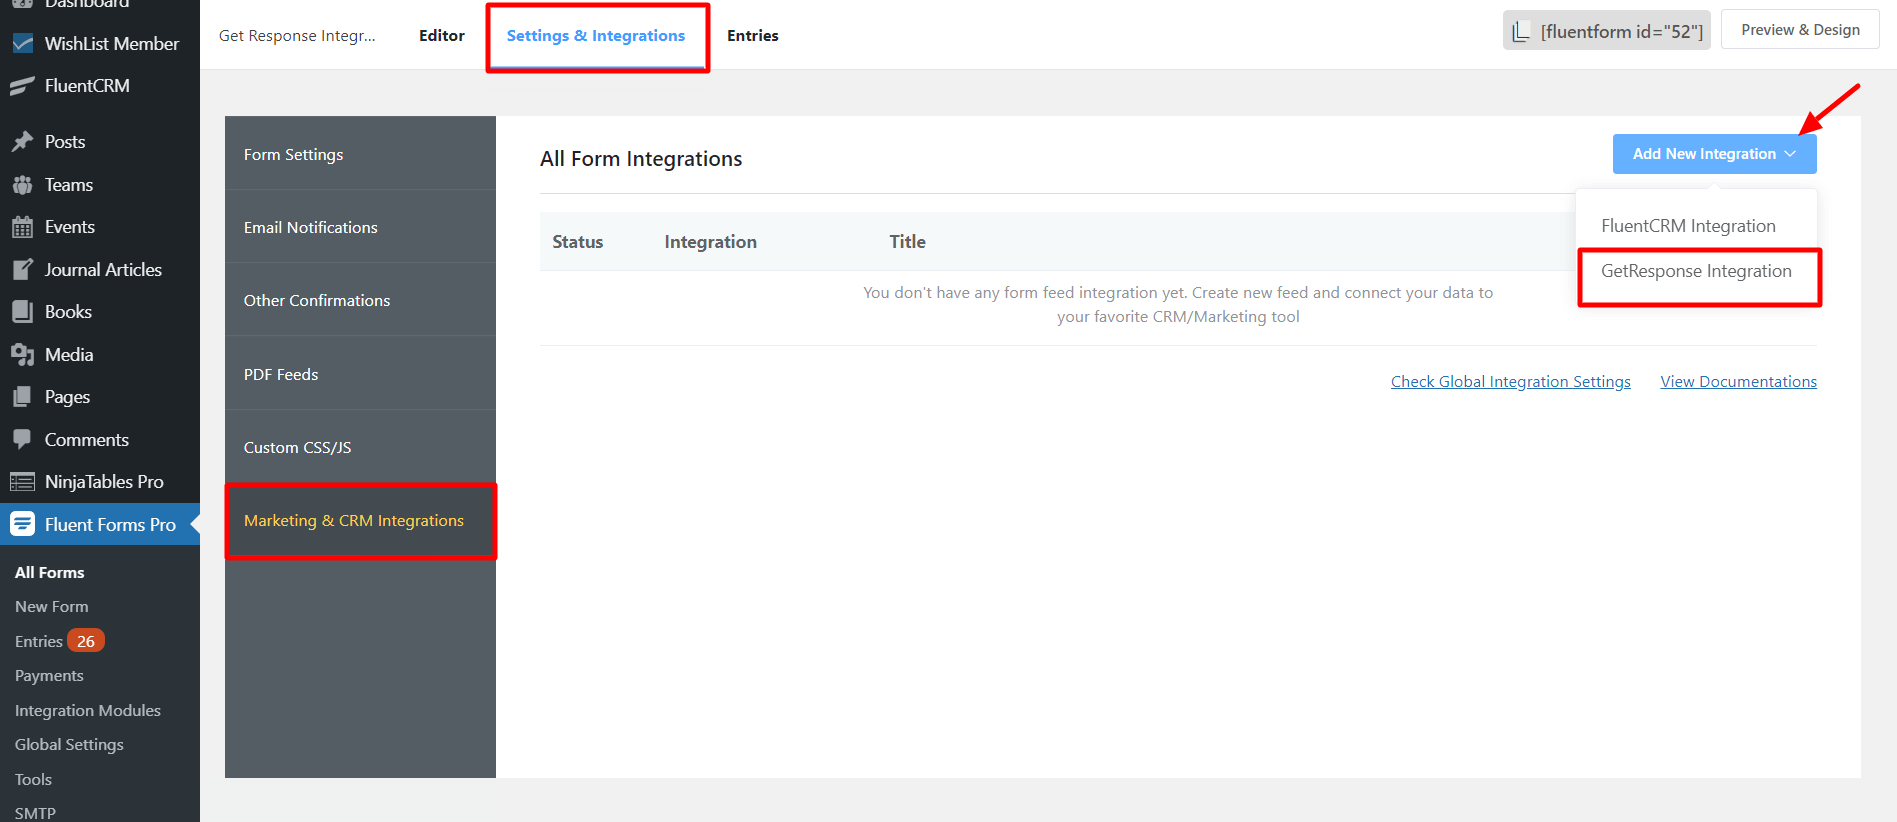 Get Response Integration in WP Fluent Form Settings